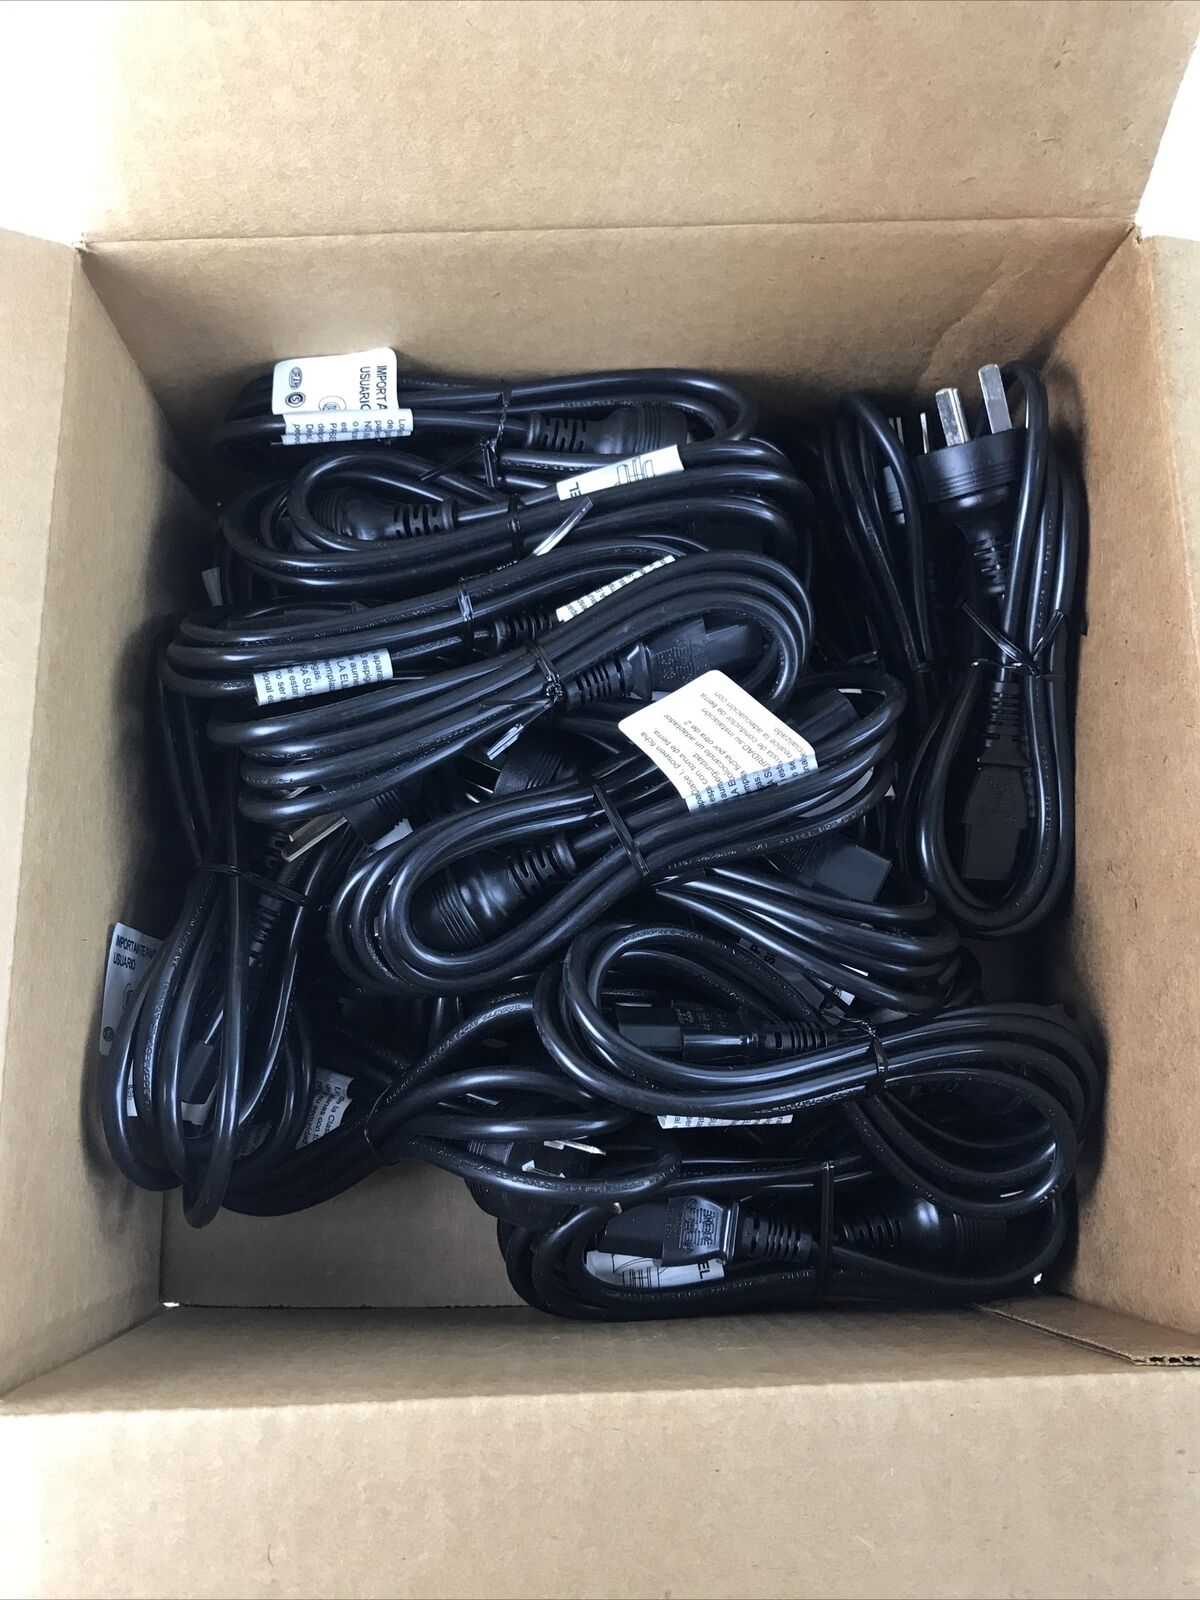 Lot of (25) Argentina I-SHENG SP-852 10A 250V Power Cord 67 in. - 1.7m